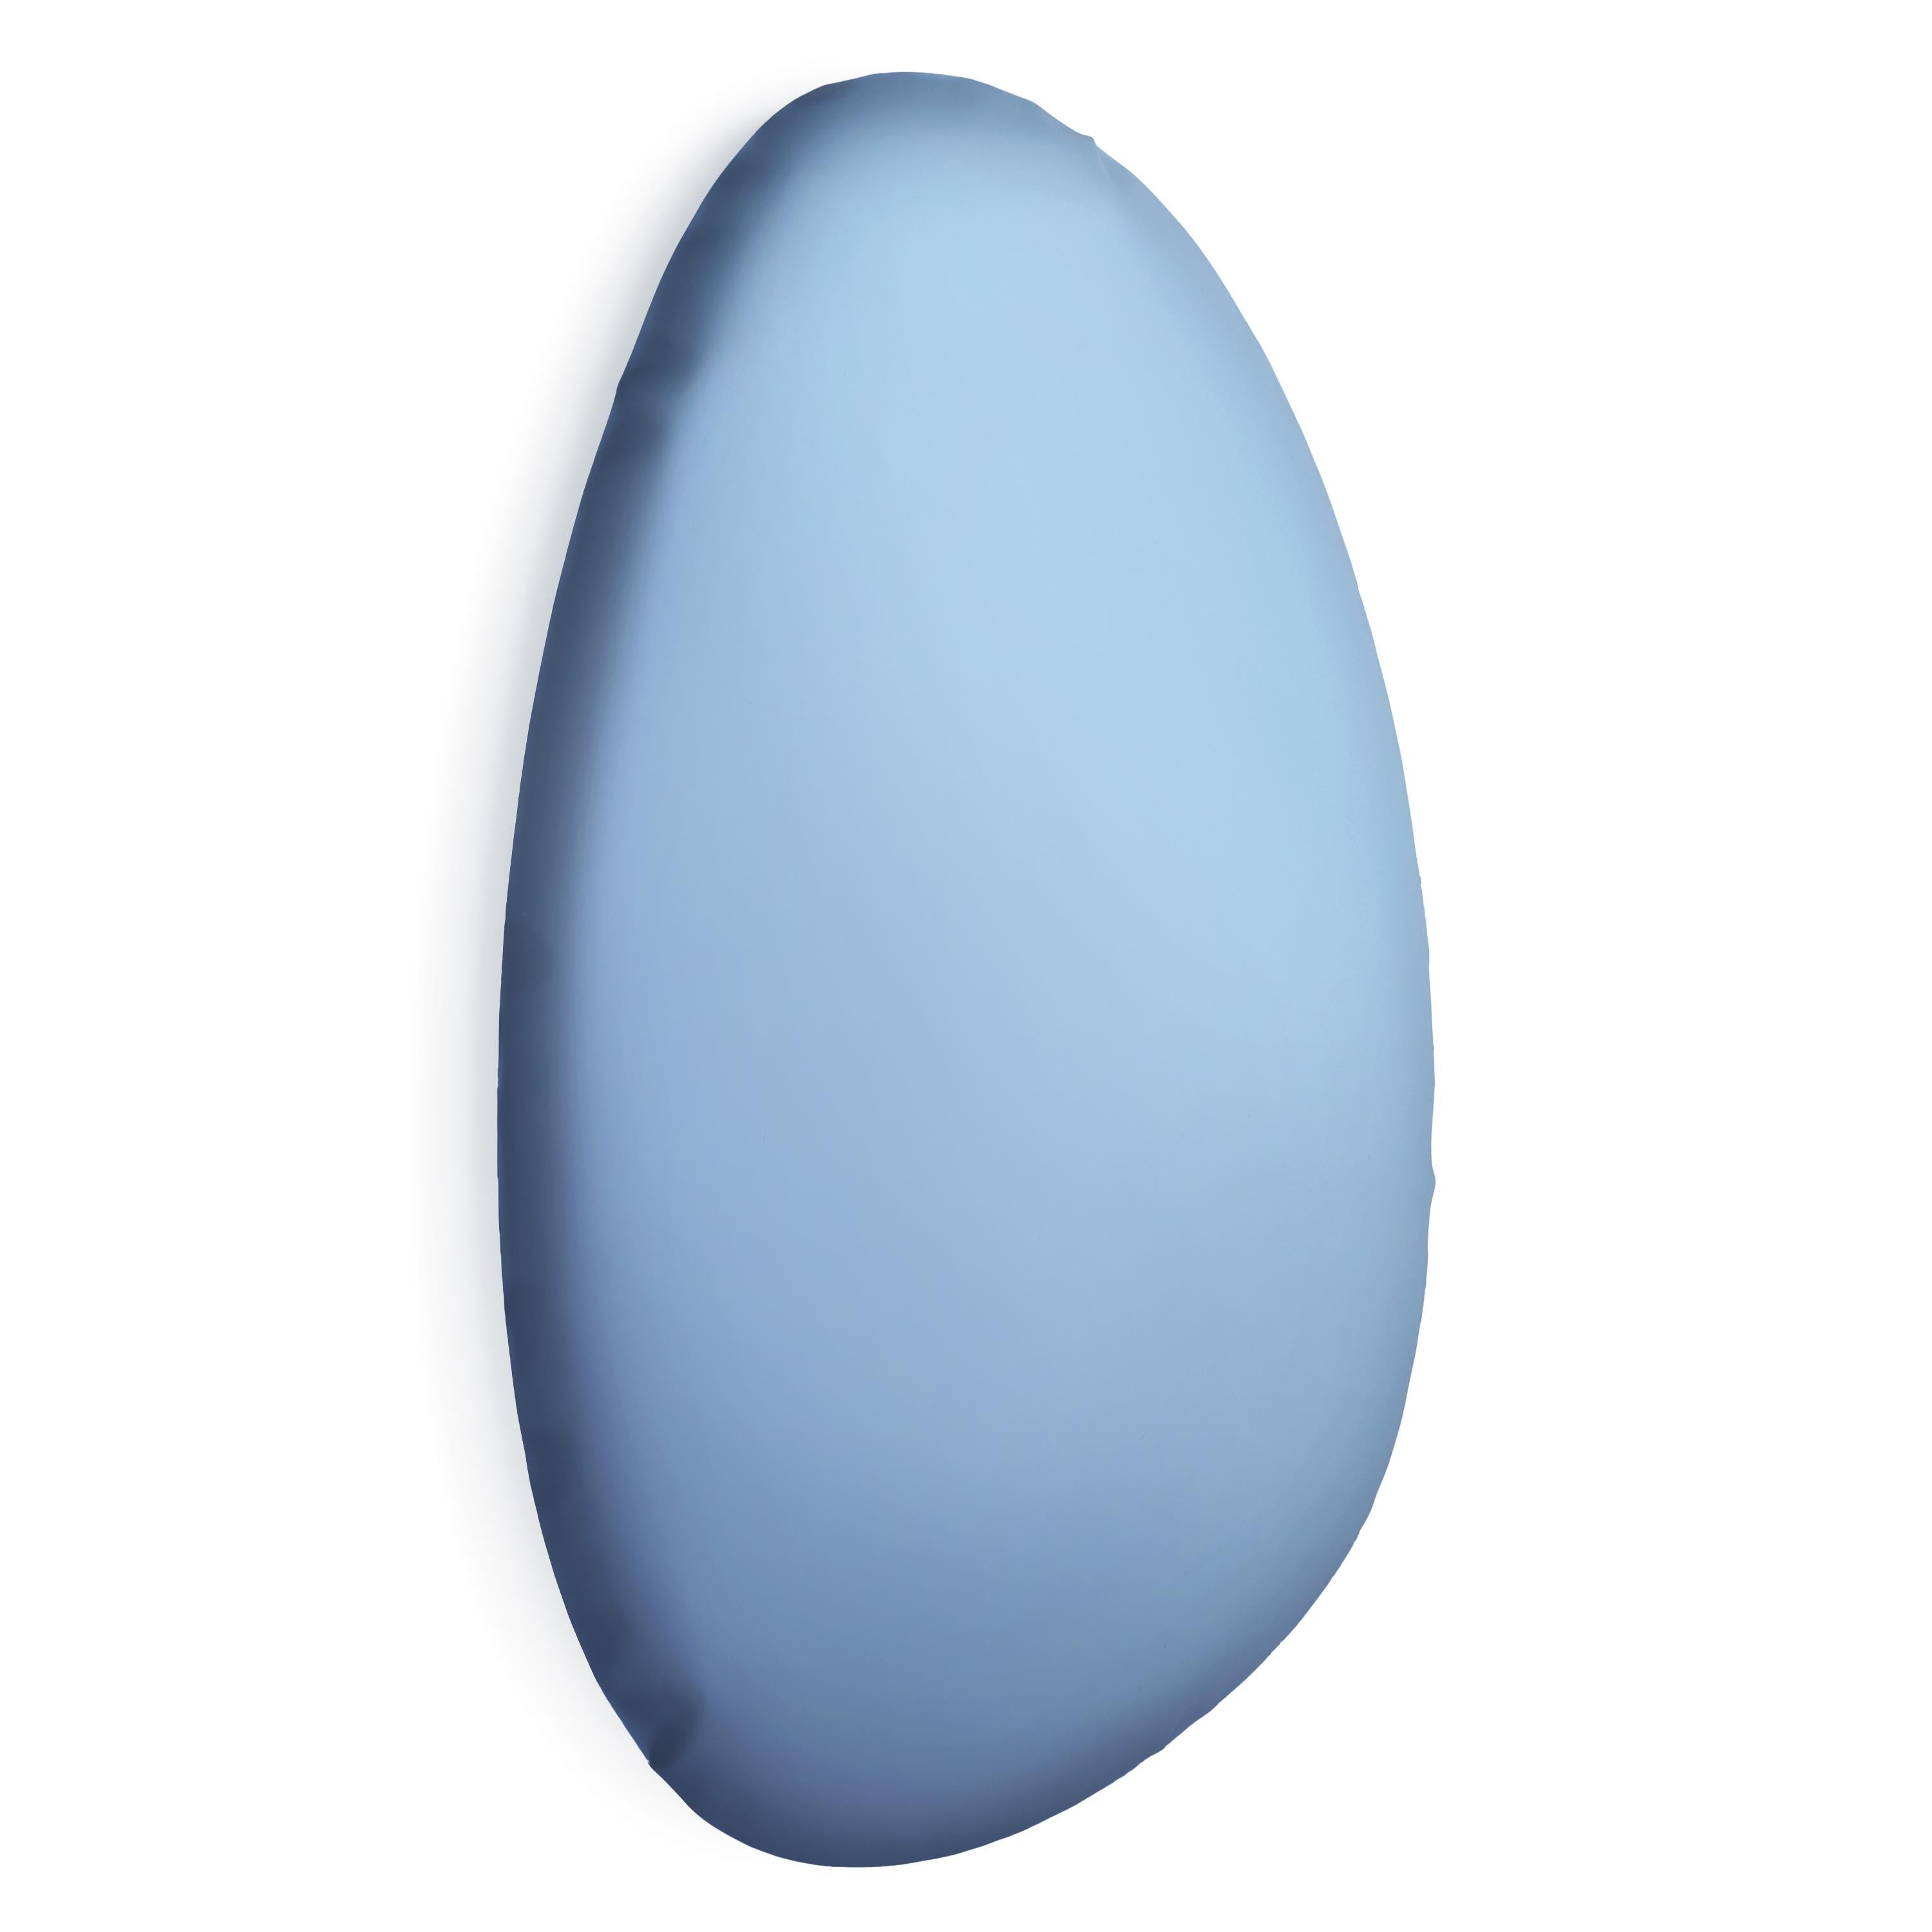 Polish Contemporary Blue Wall Sculpture 'Tafla O3', Cotton Candy Collection by Zieta For Sale